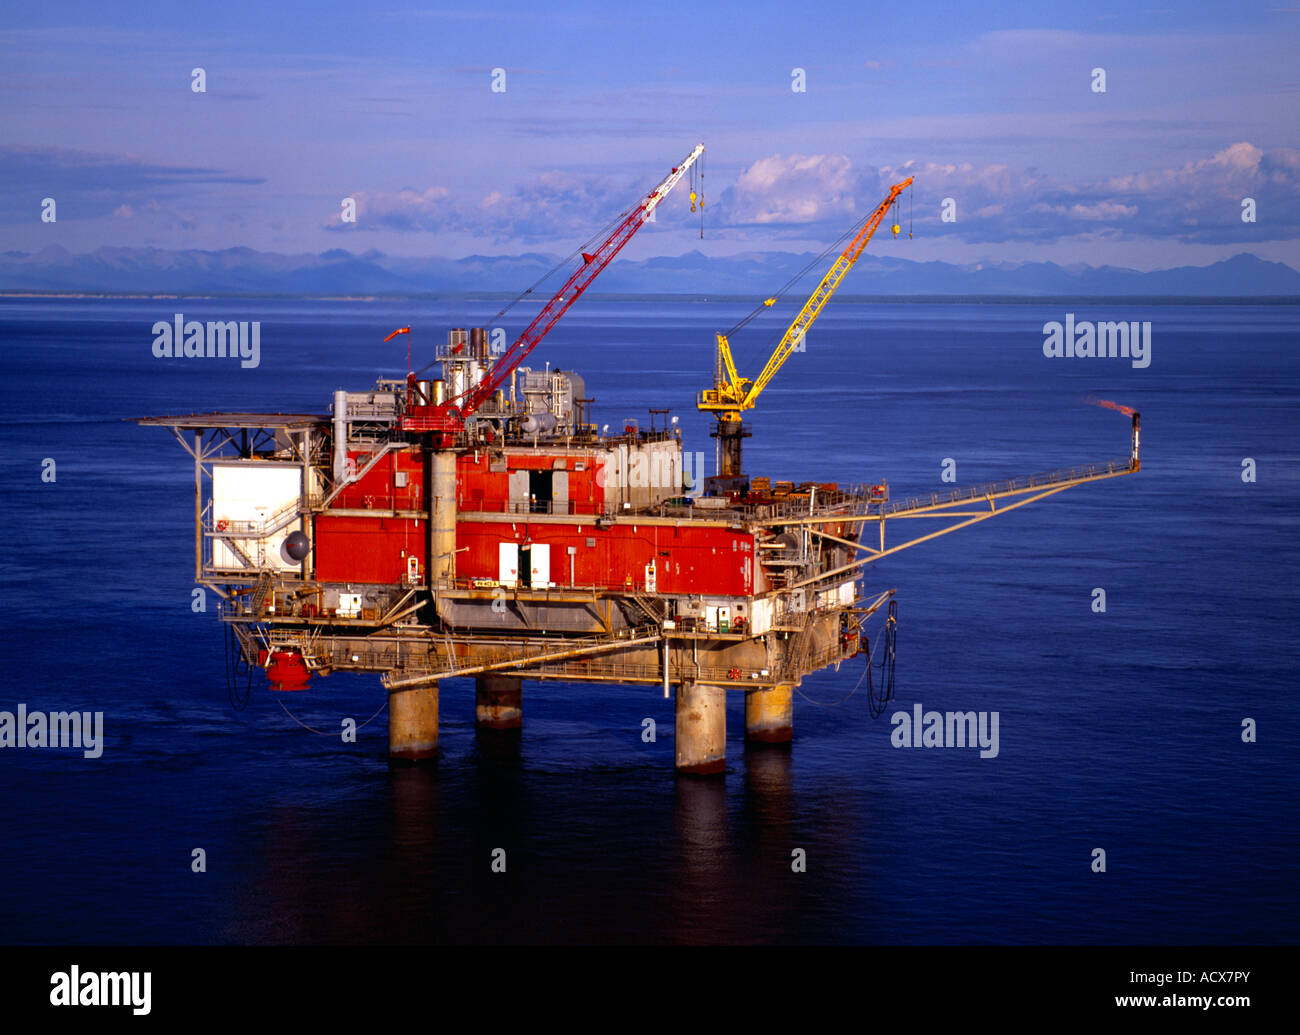 Tyonek A offshore gas production platform operating in the North Cook Inlet Gas Field in the Cook Inlet of Alaska. Stock Photo